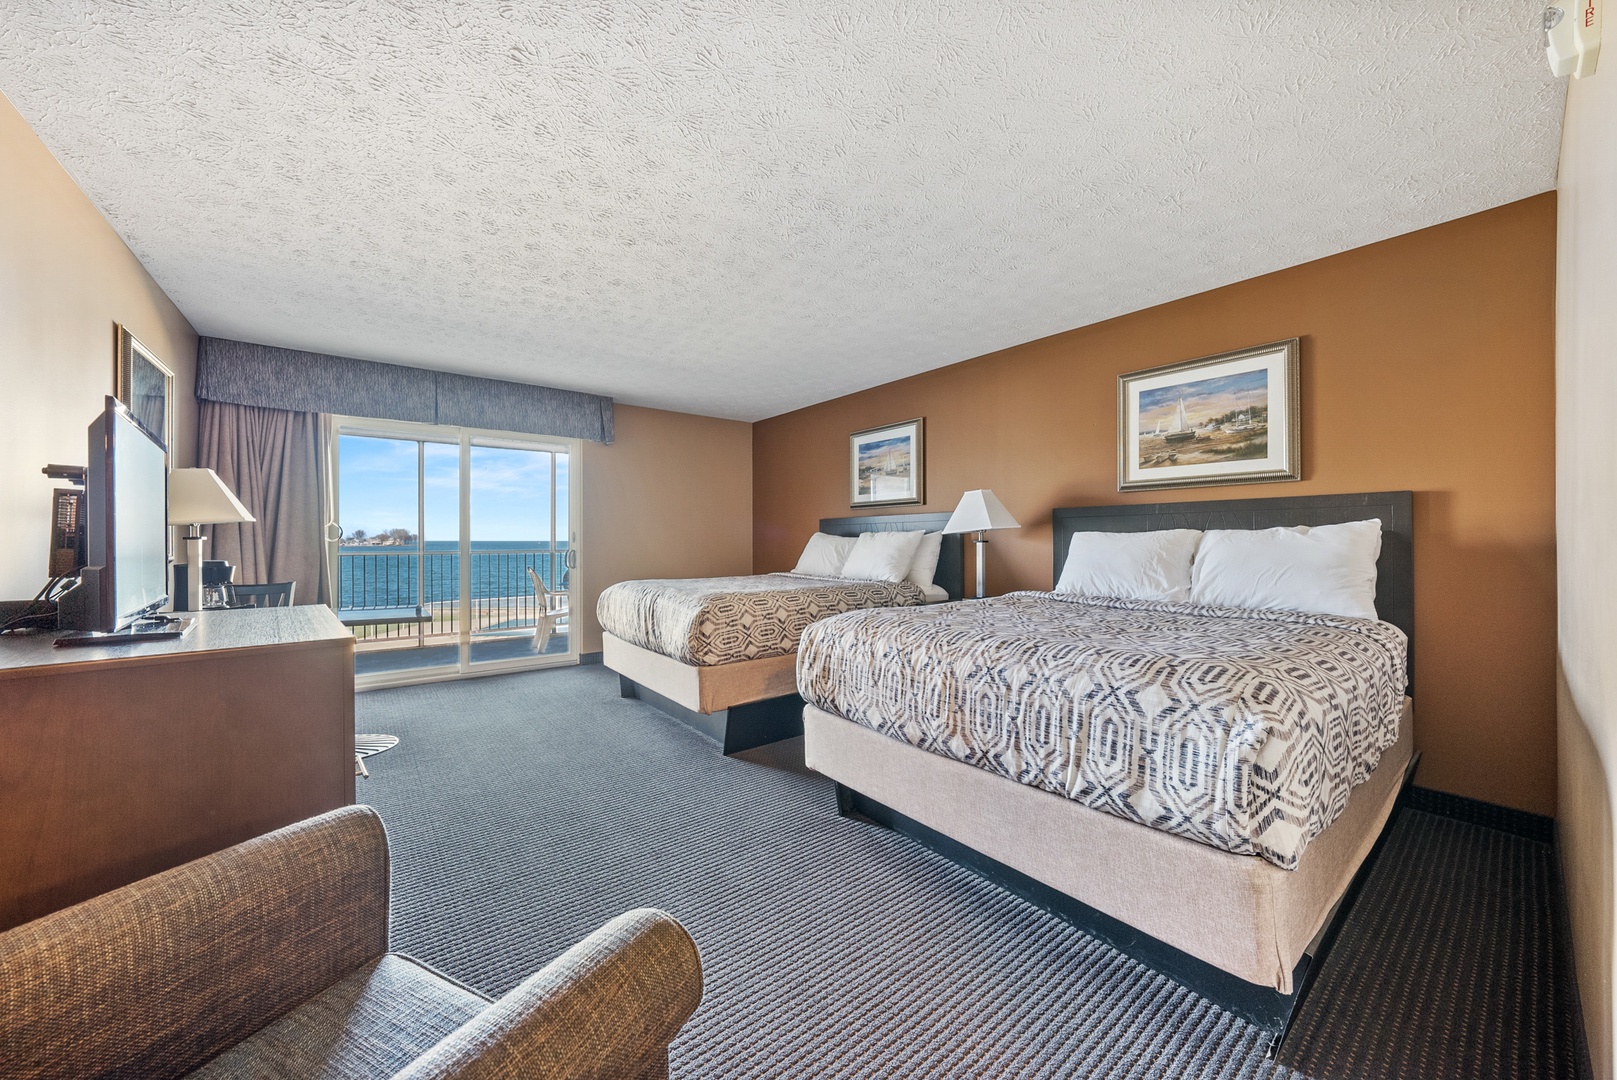 Experience Ultimate Relaxation with 2 Queen Beds at Bayshore Resort on Put-in-Bay Island